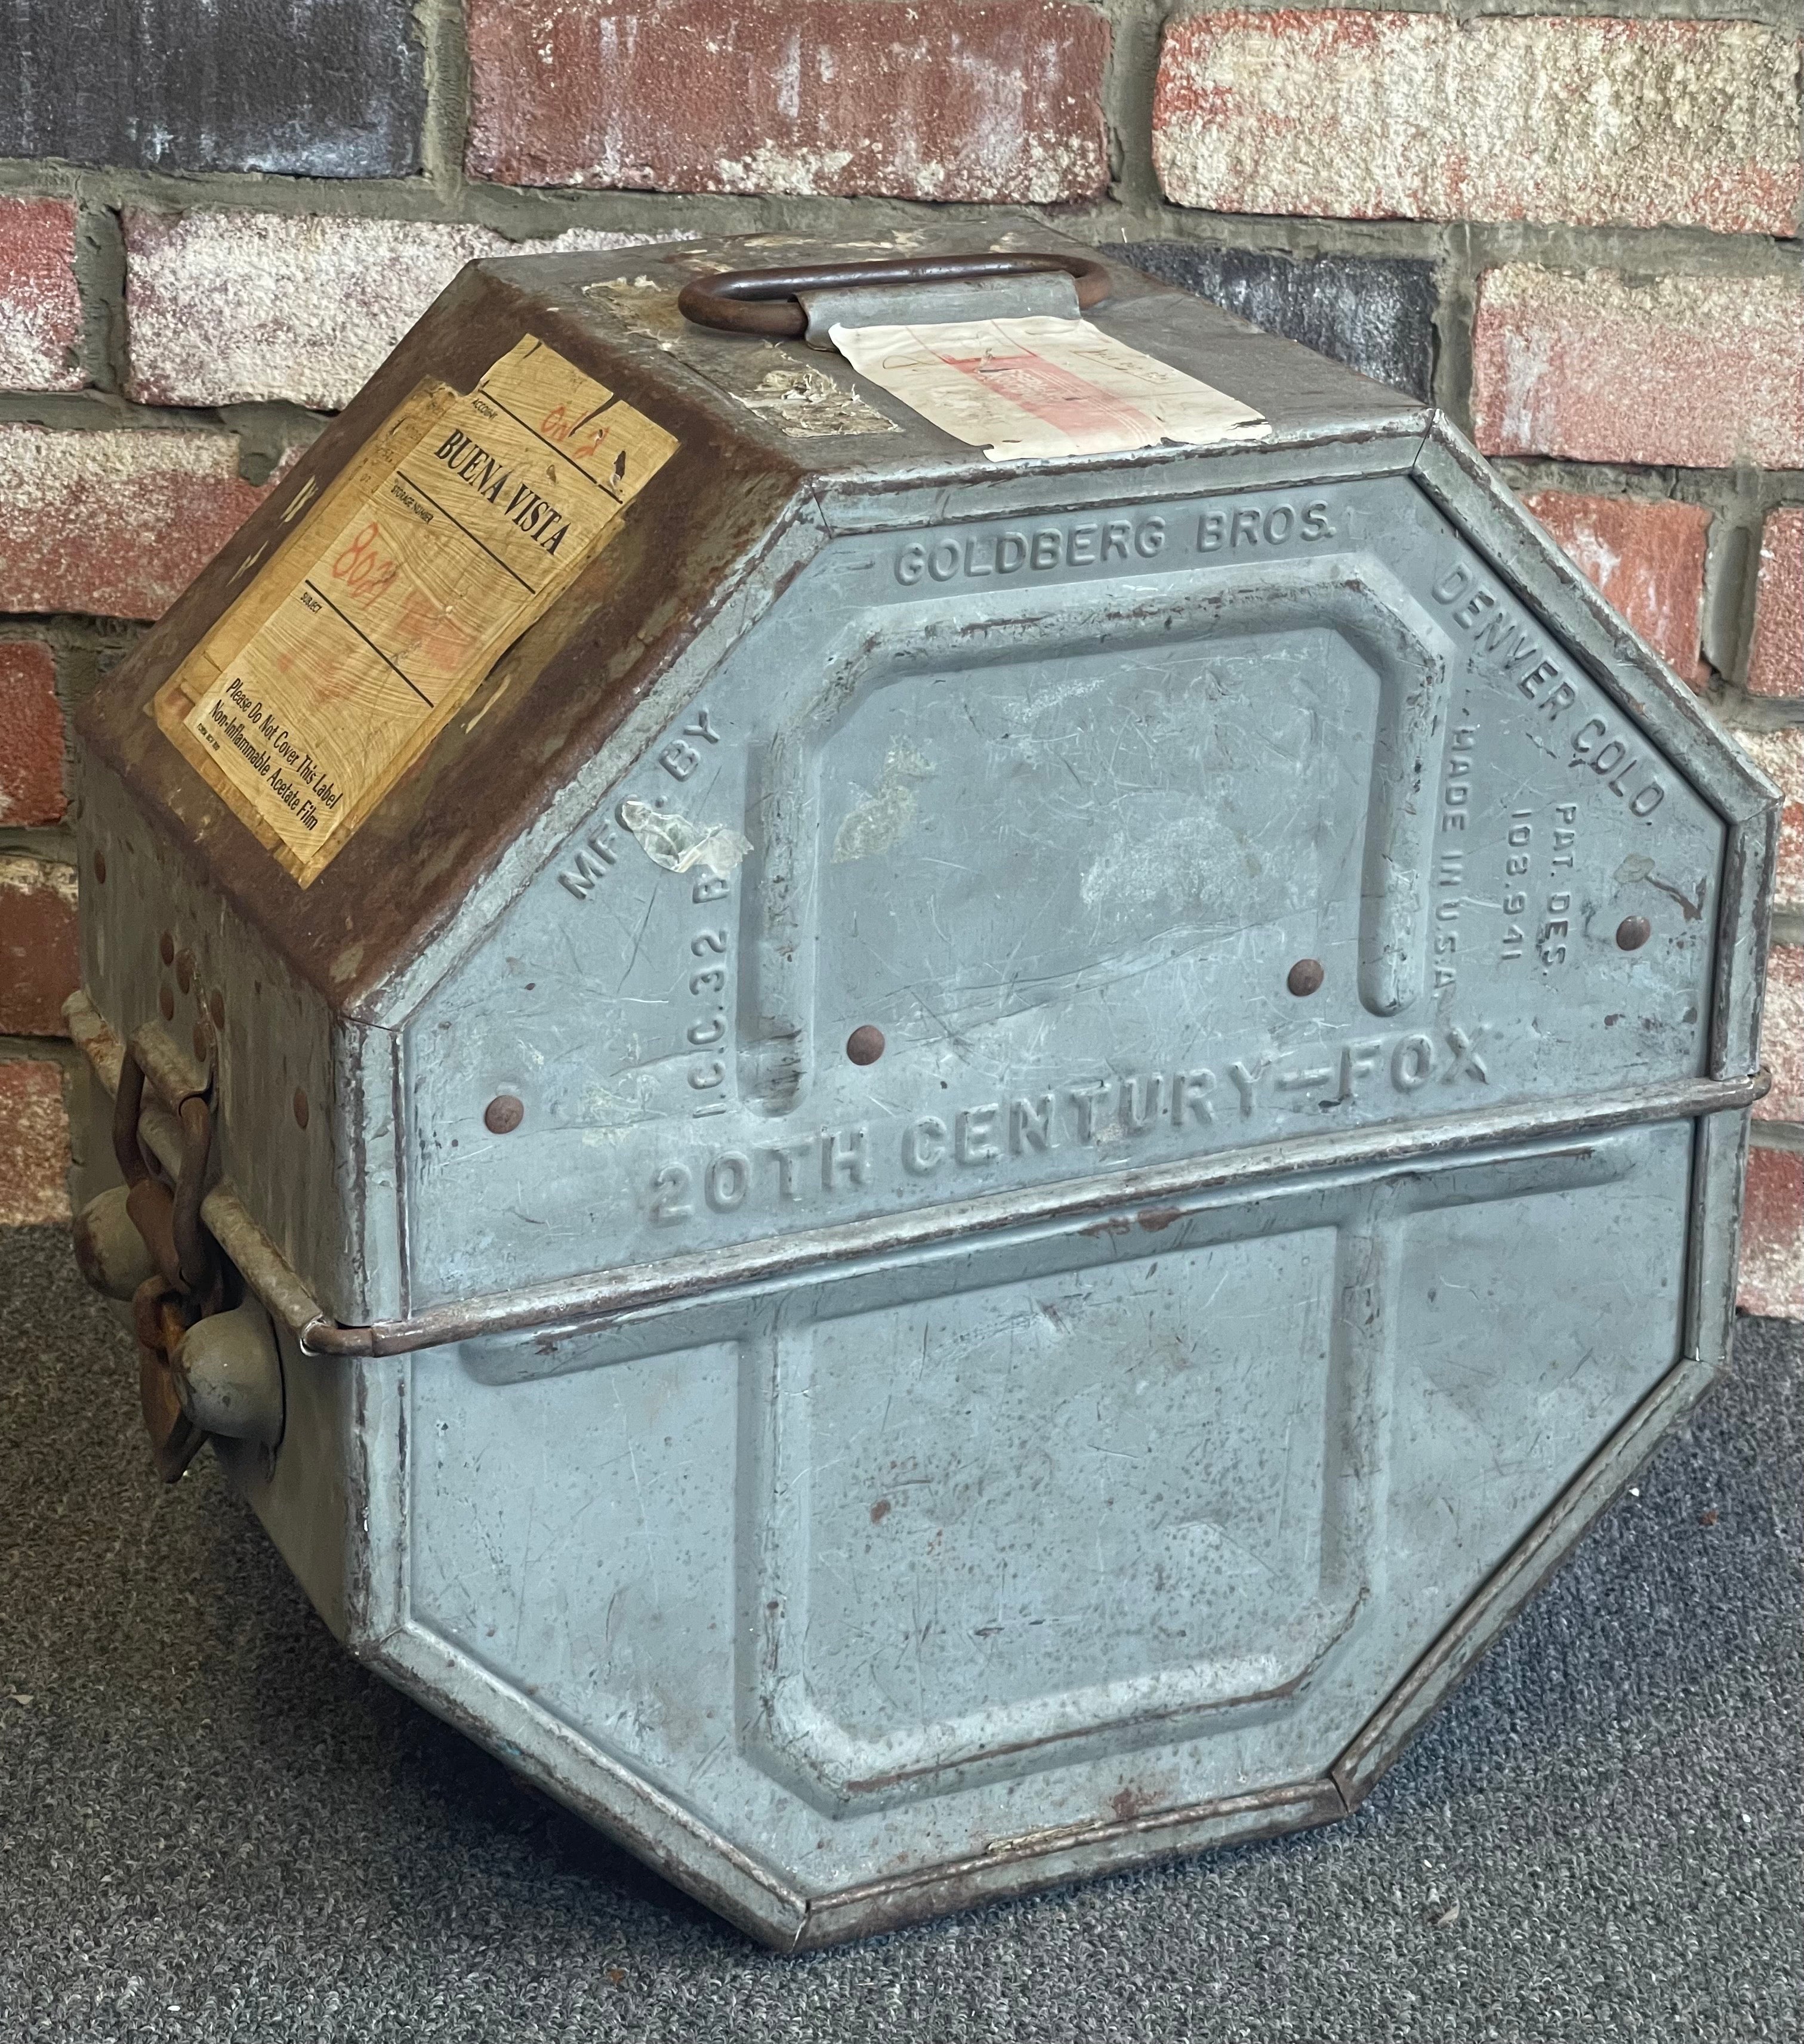 A rare 20th Century Fox film studios 35mm motion picture reel shipping case, circa 1940. The case was manufactured by Goldberg Brothers in Denver, CO and measures 16